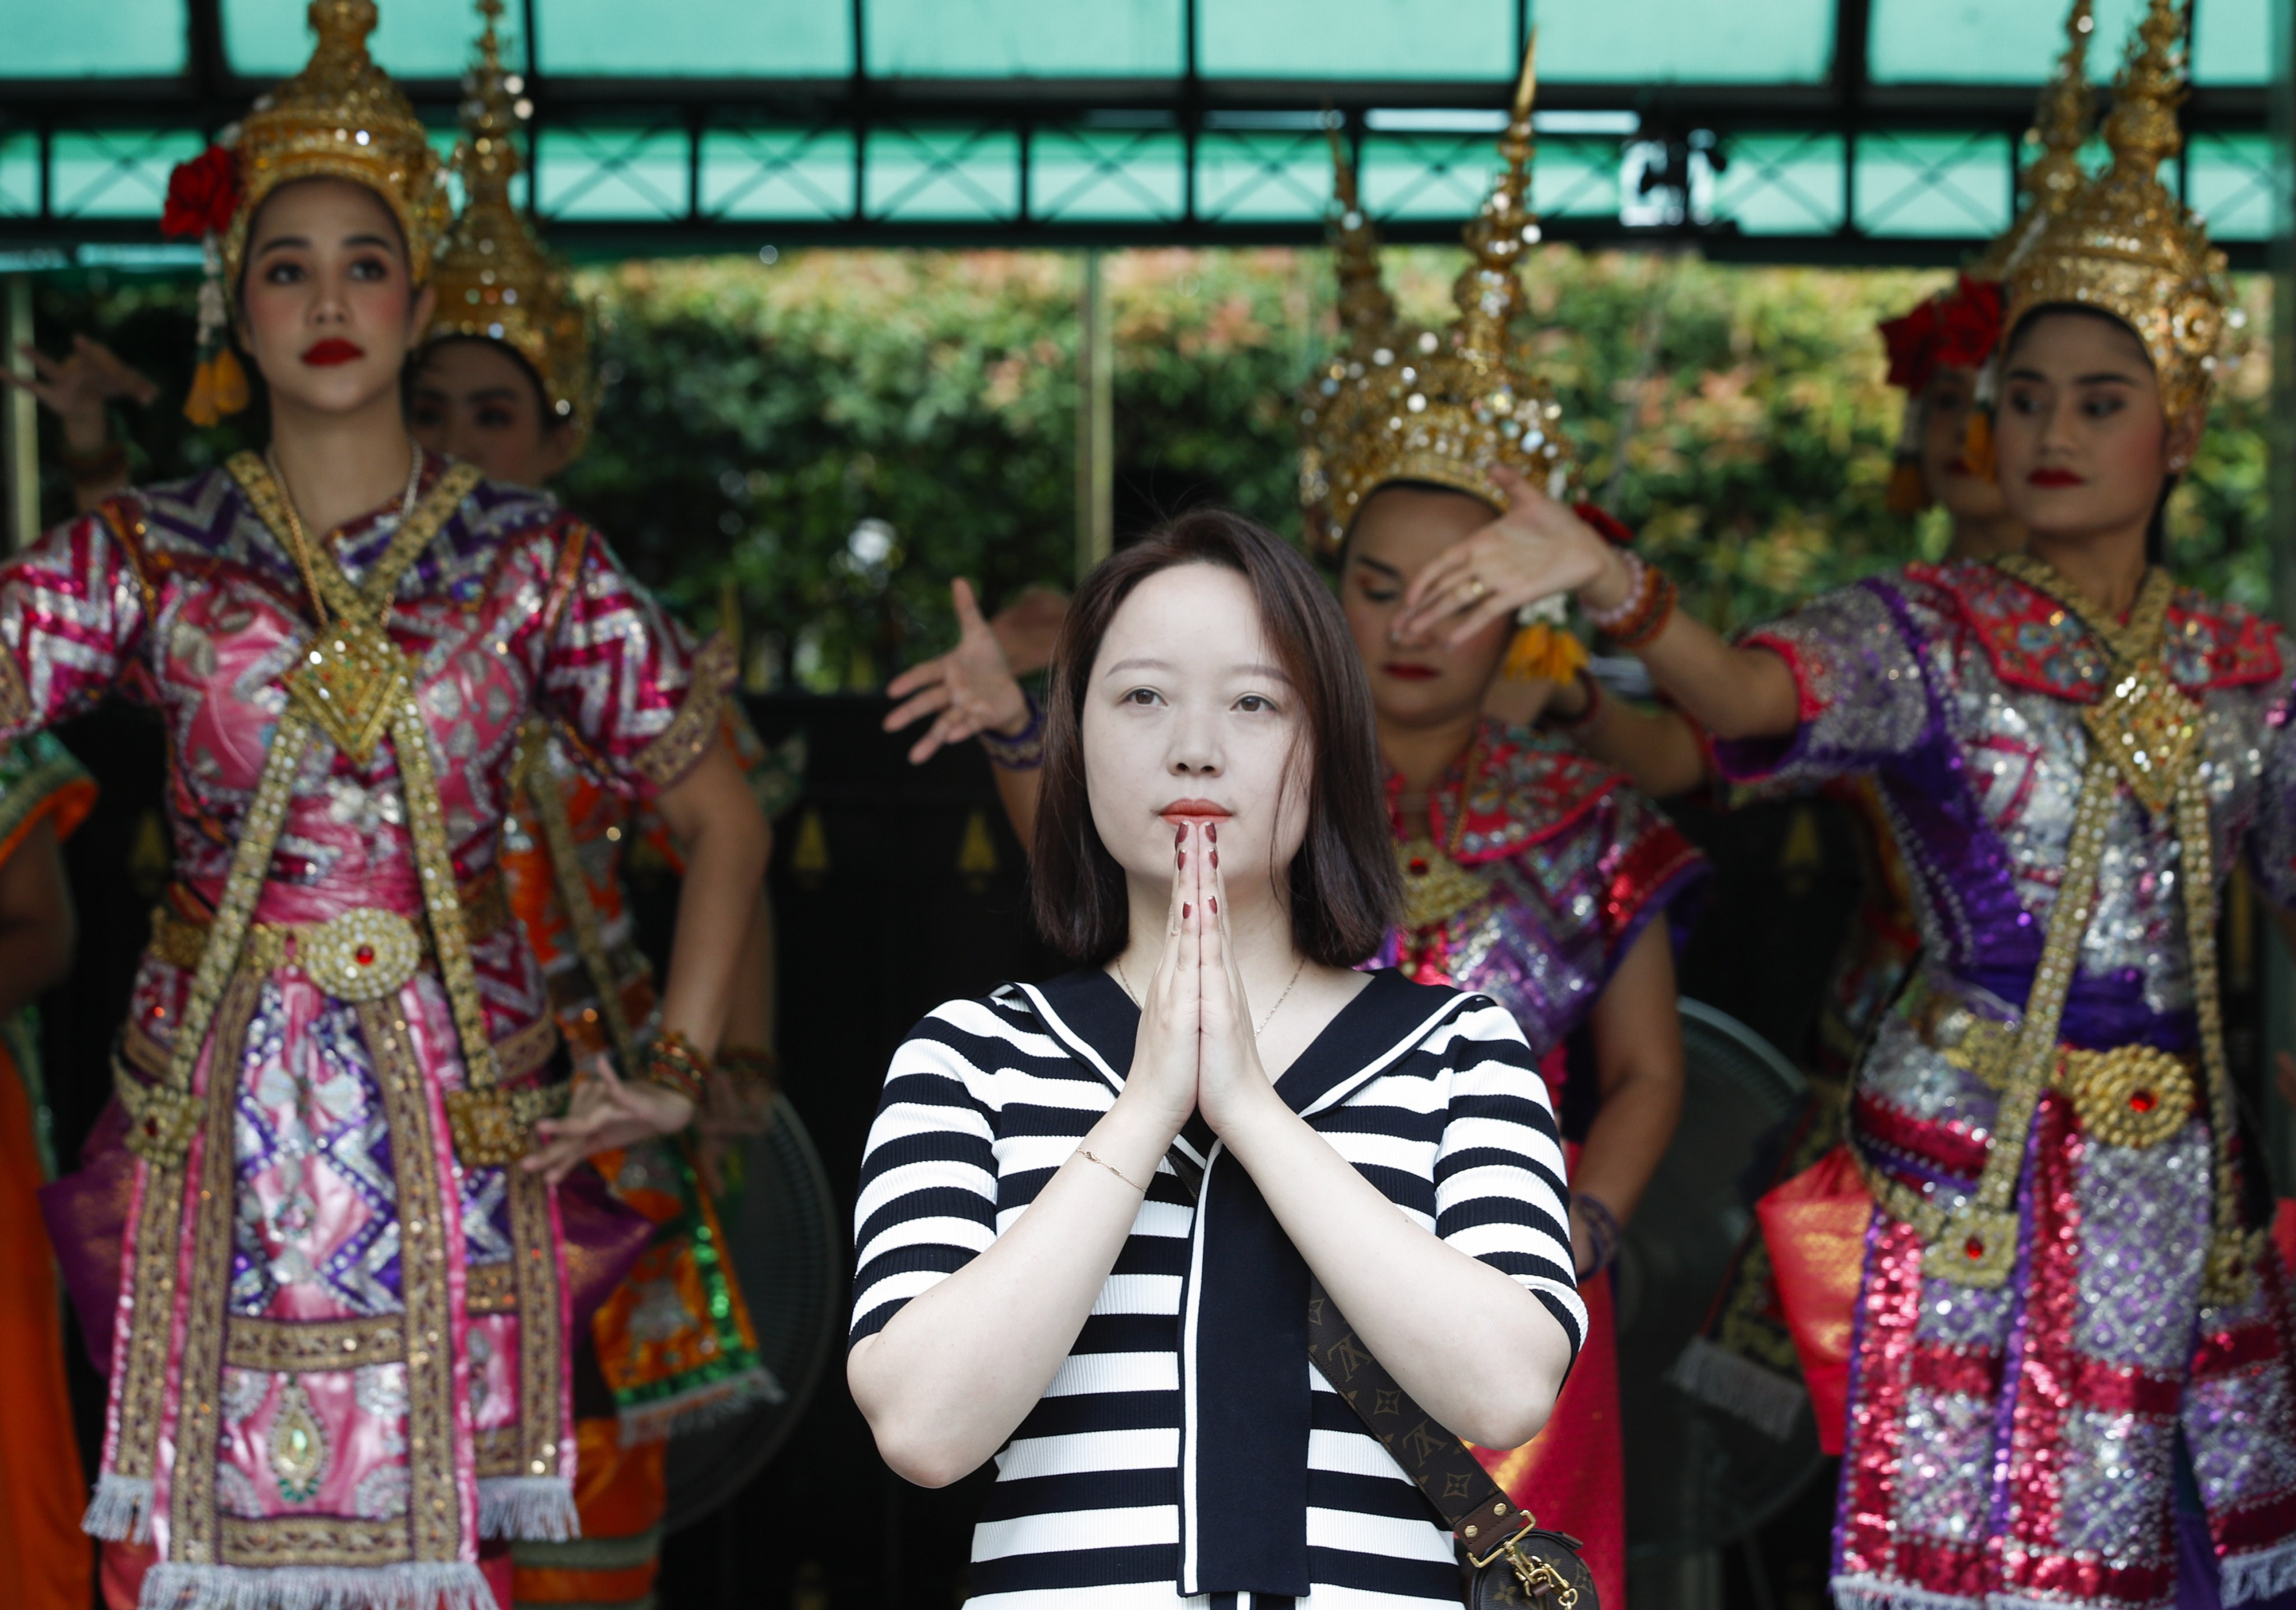 A Chinese tourist praying in front of Thai dancers at the popular Erawan Shrine in Bangkok on Friday. Photo: EPA-EFE